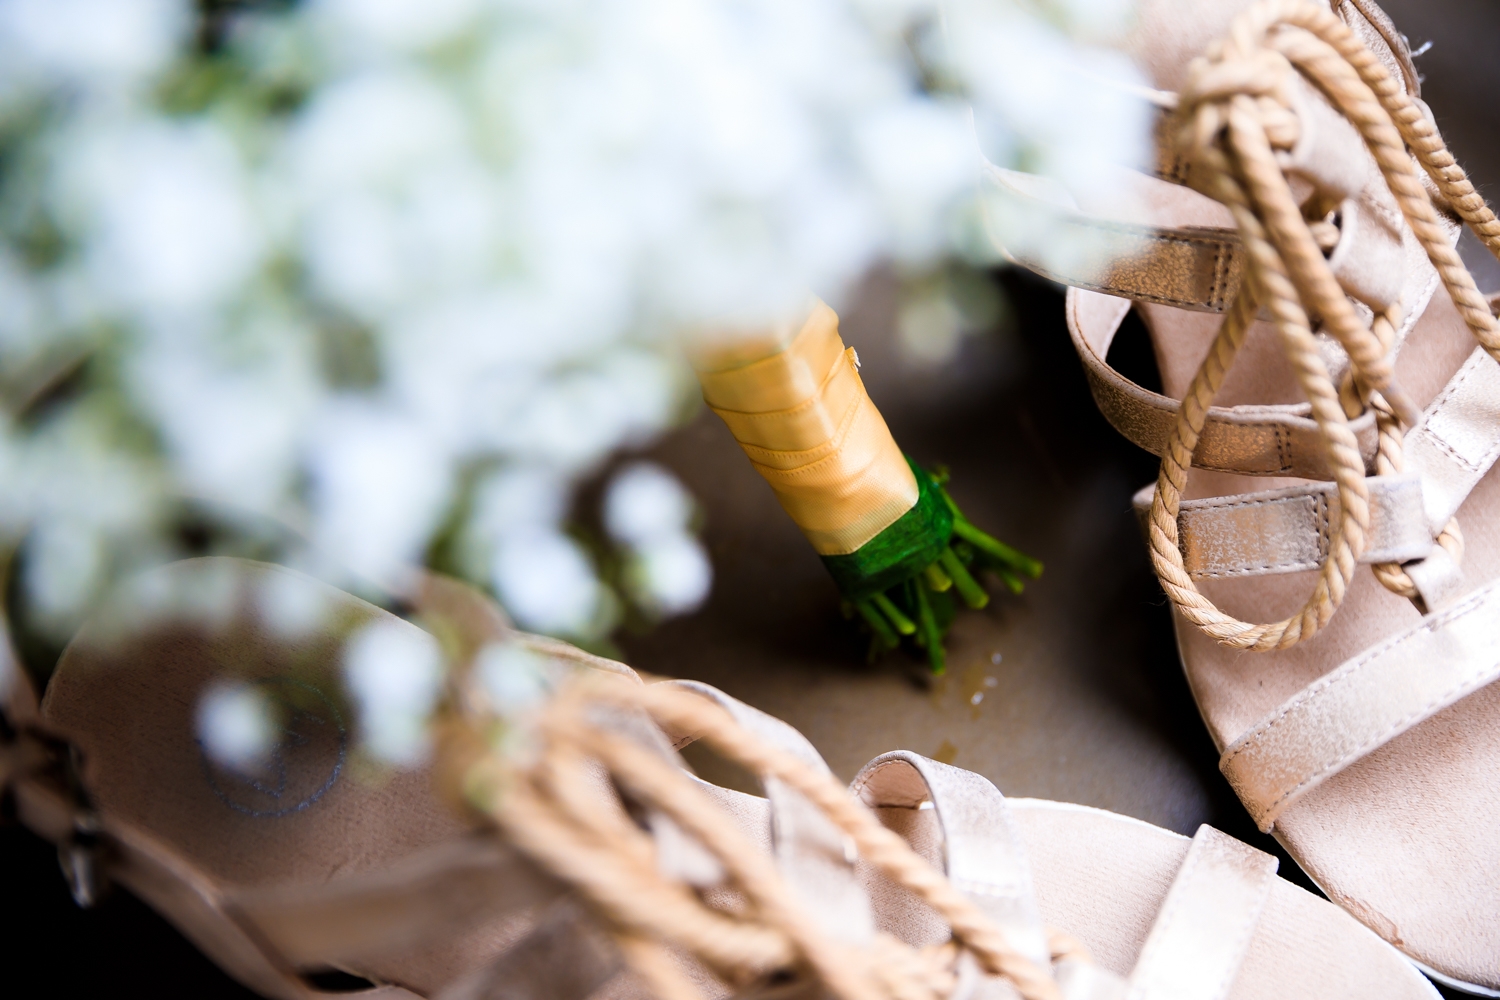 Danielle's bouquet and wedding shoes lying elegantly on a leather chair